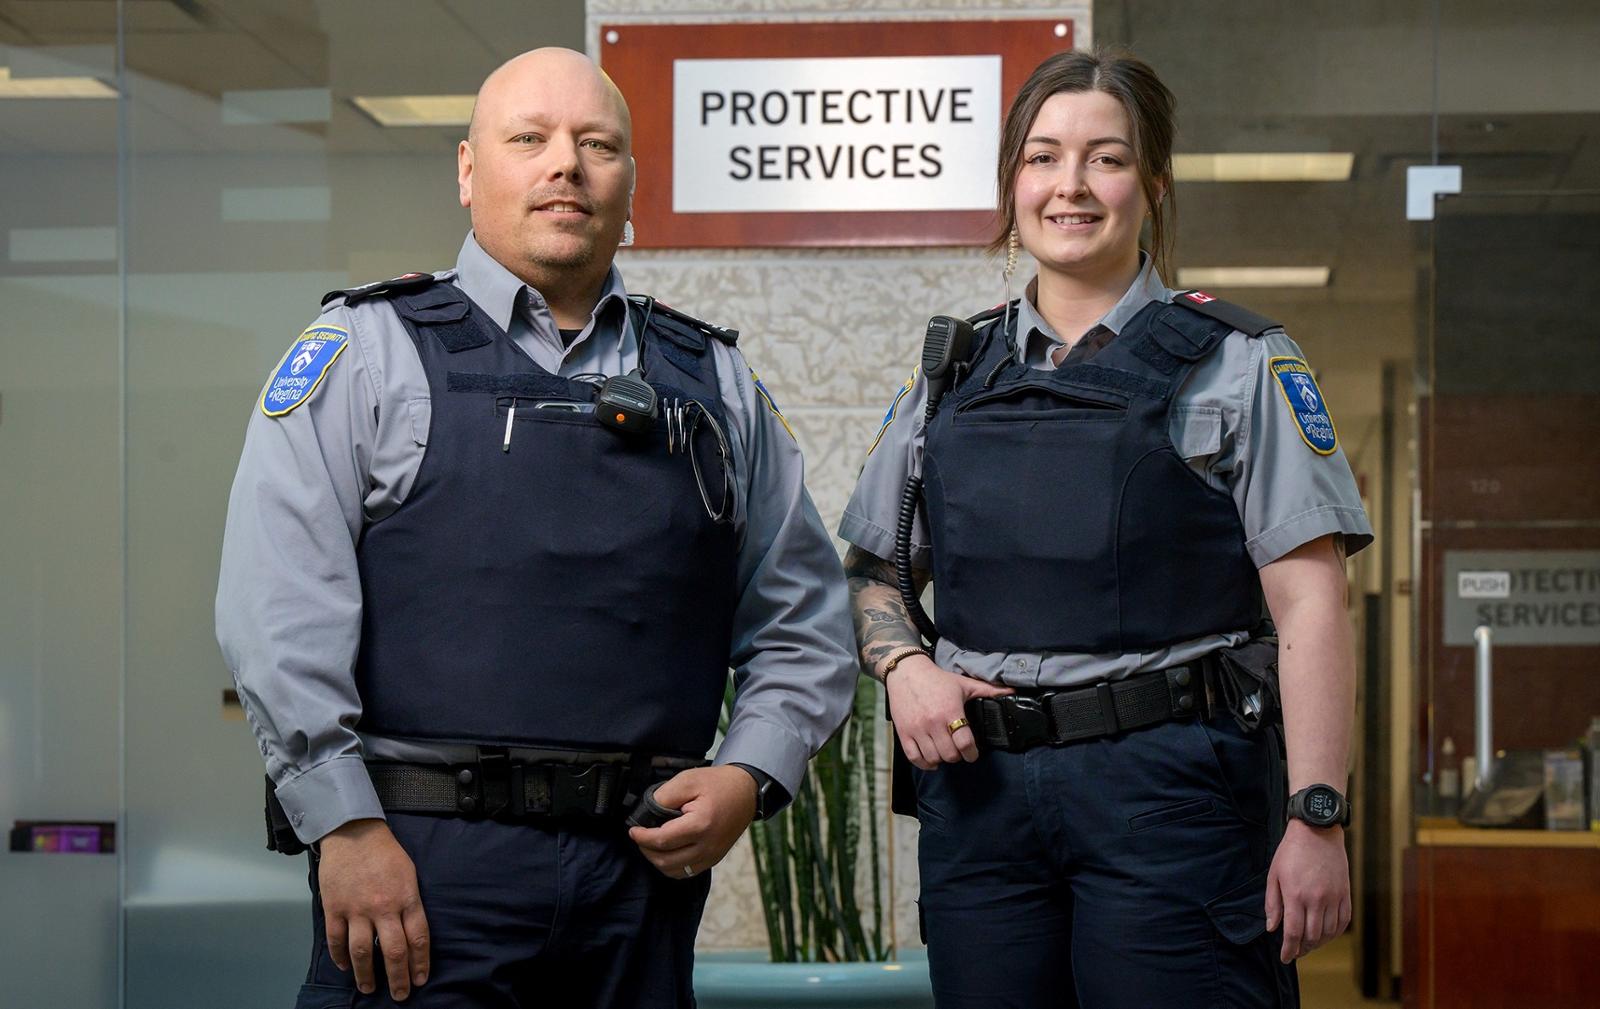 Two uniformed Protective Services officers pose in front of new signage.